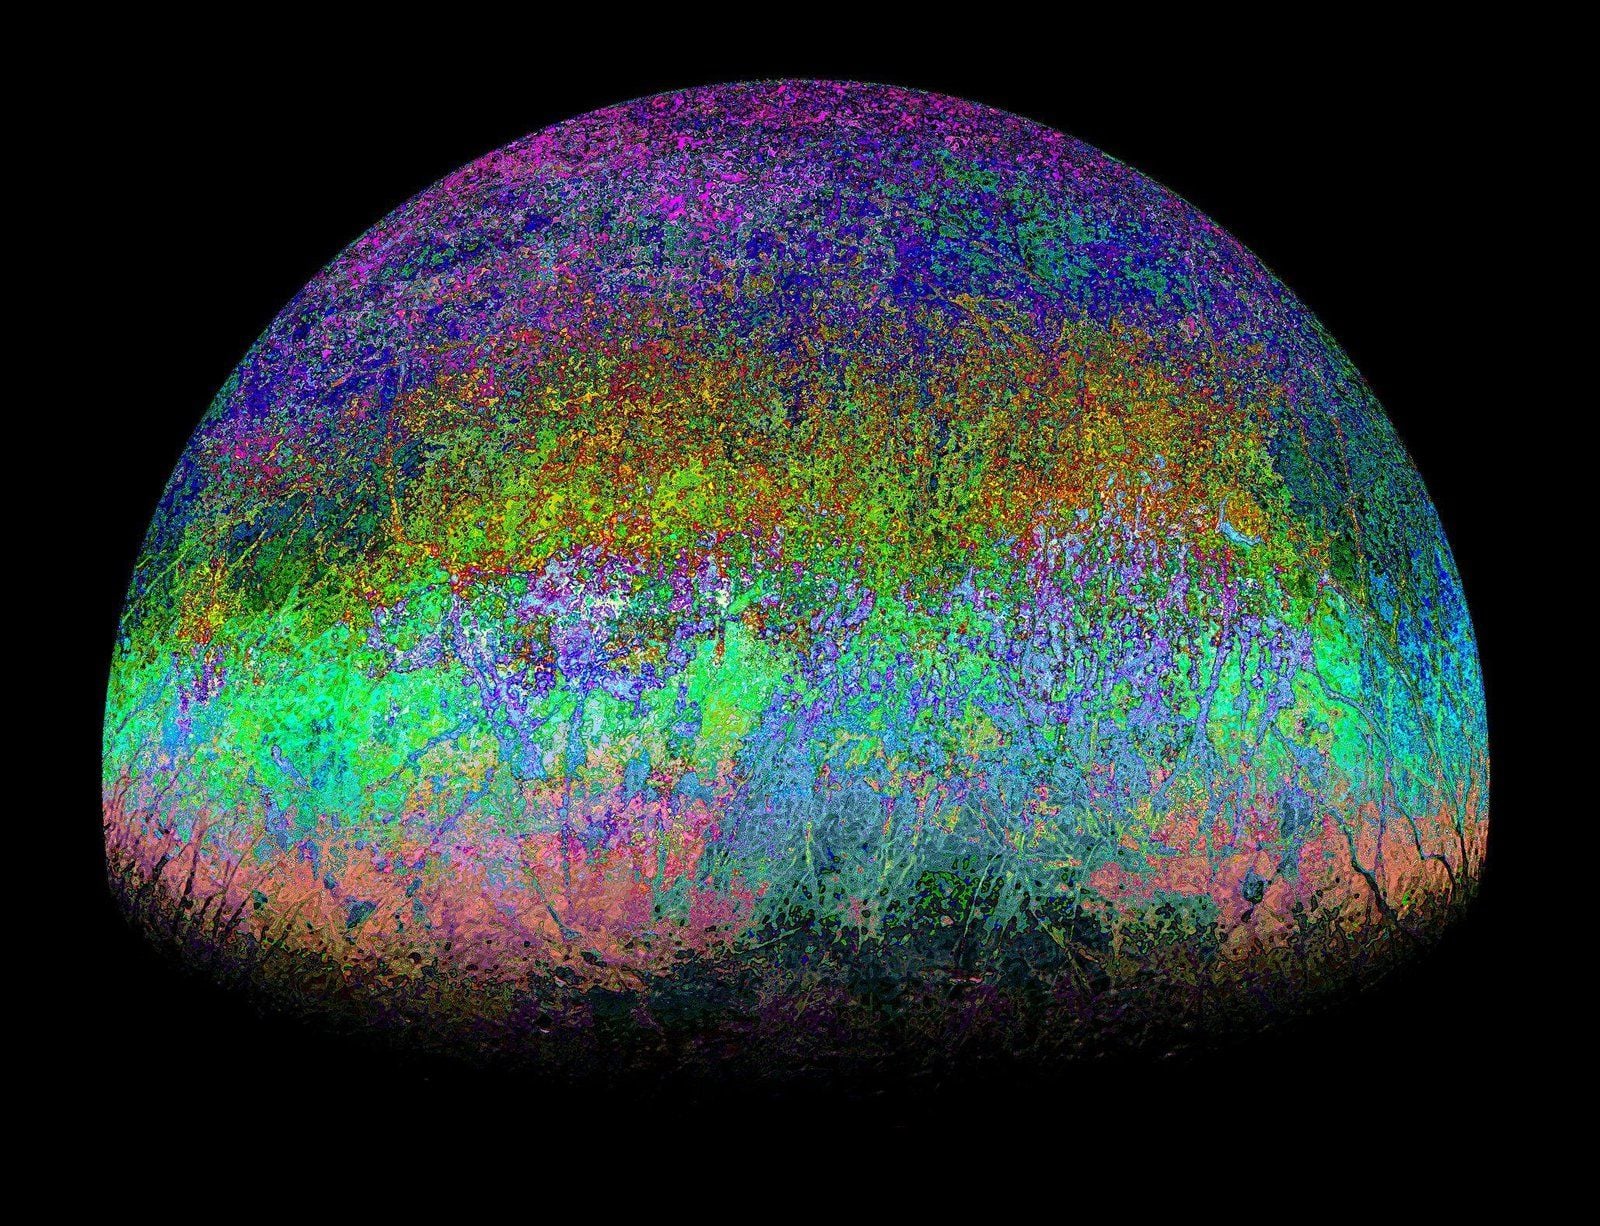 “Fall Colors of Europa,” a kaleidoscopic image of Jupiter’s icy moon Europa by citizen scientist Fernando Garcia.